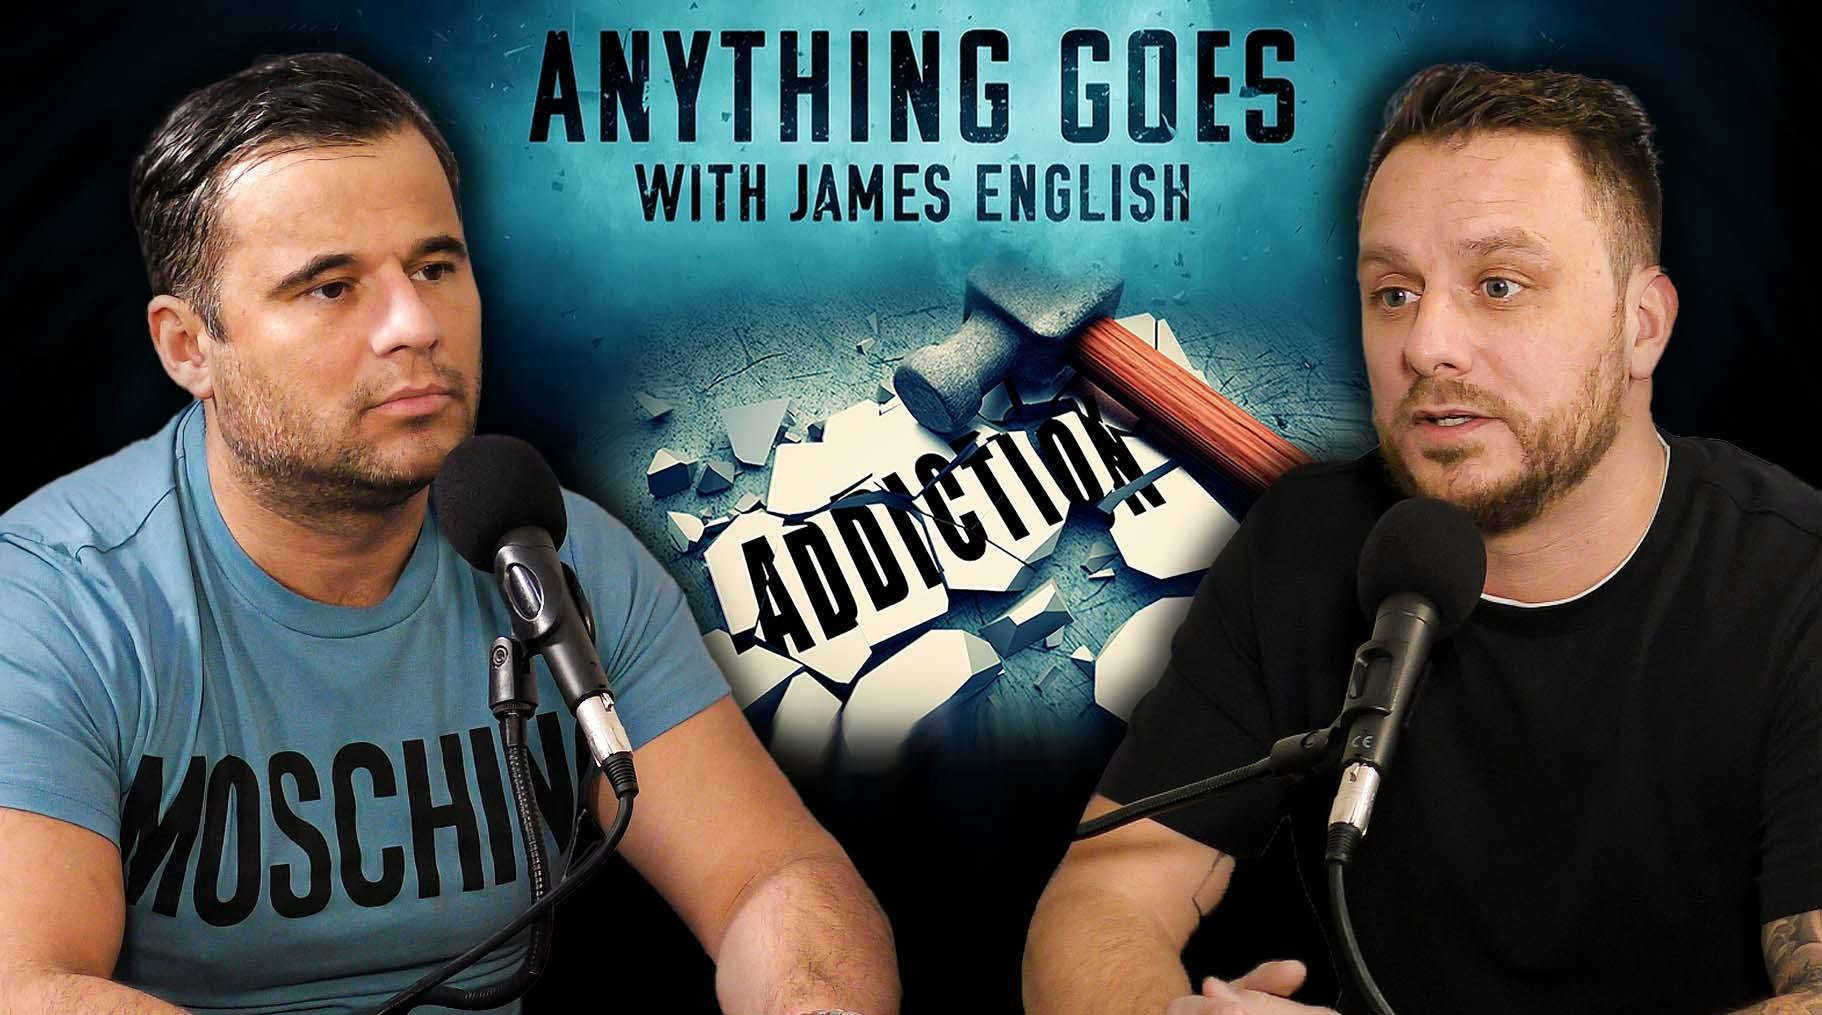 James English and Dapper Laughs Talk About Addictions and Making Changes